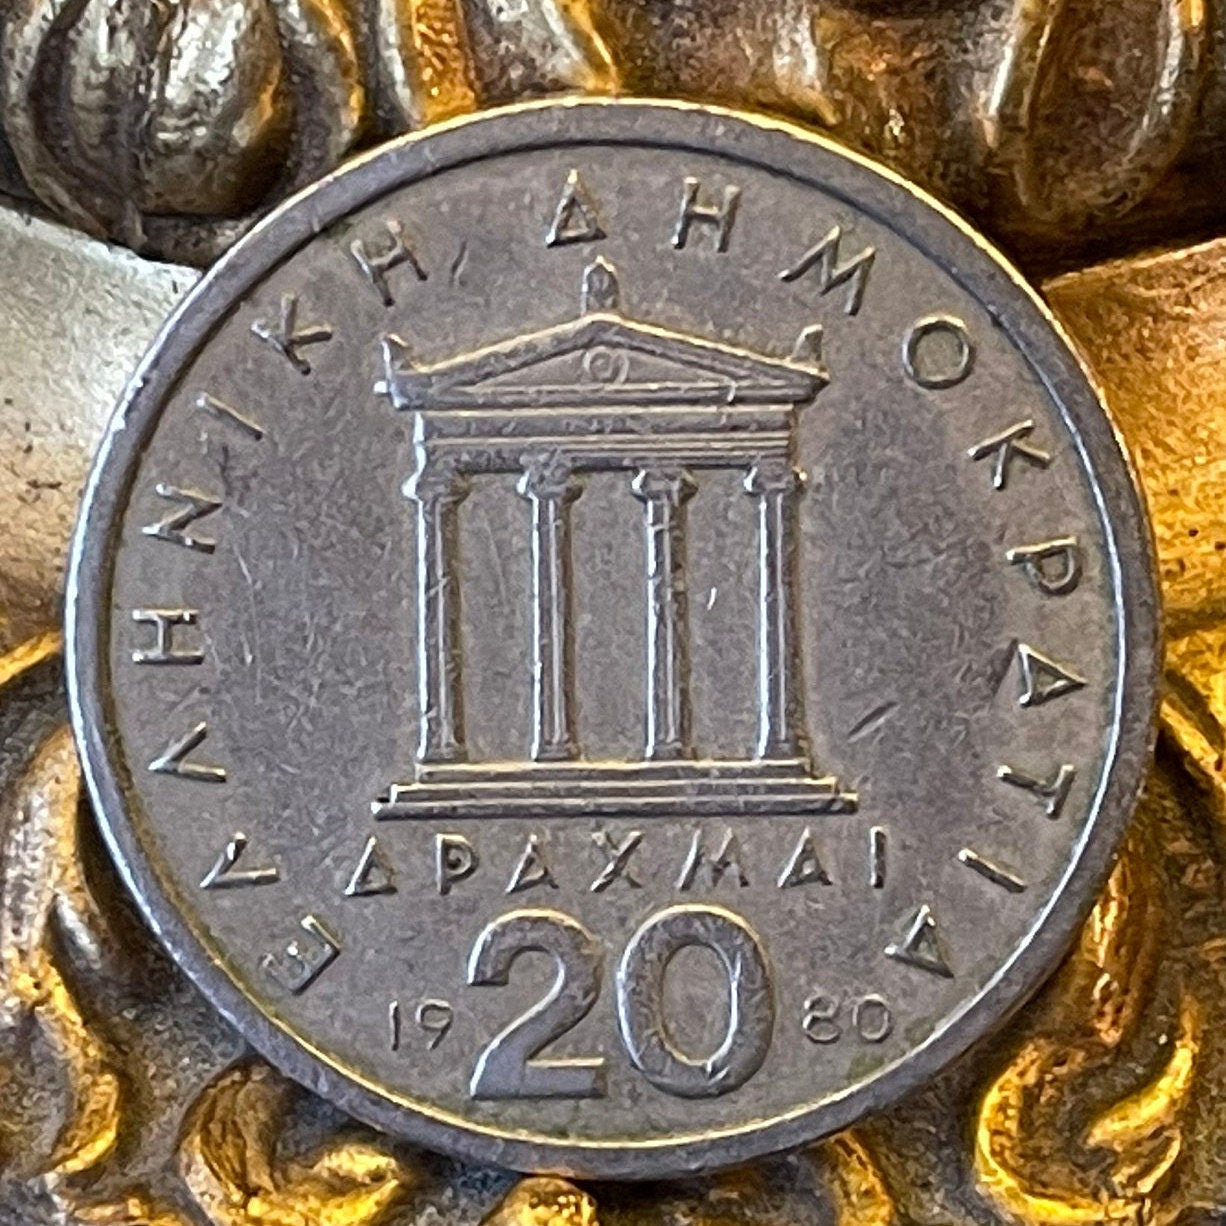 Pericles & Parthenon 20 Drachmai Greece Authentic Coin Money for Jewelry and Craft Making